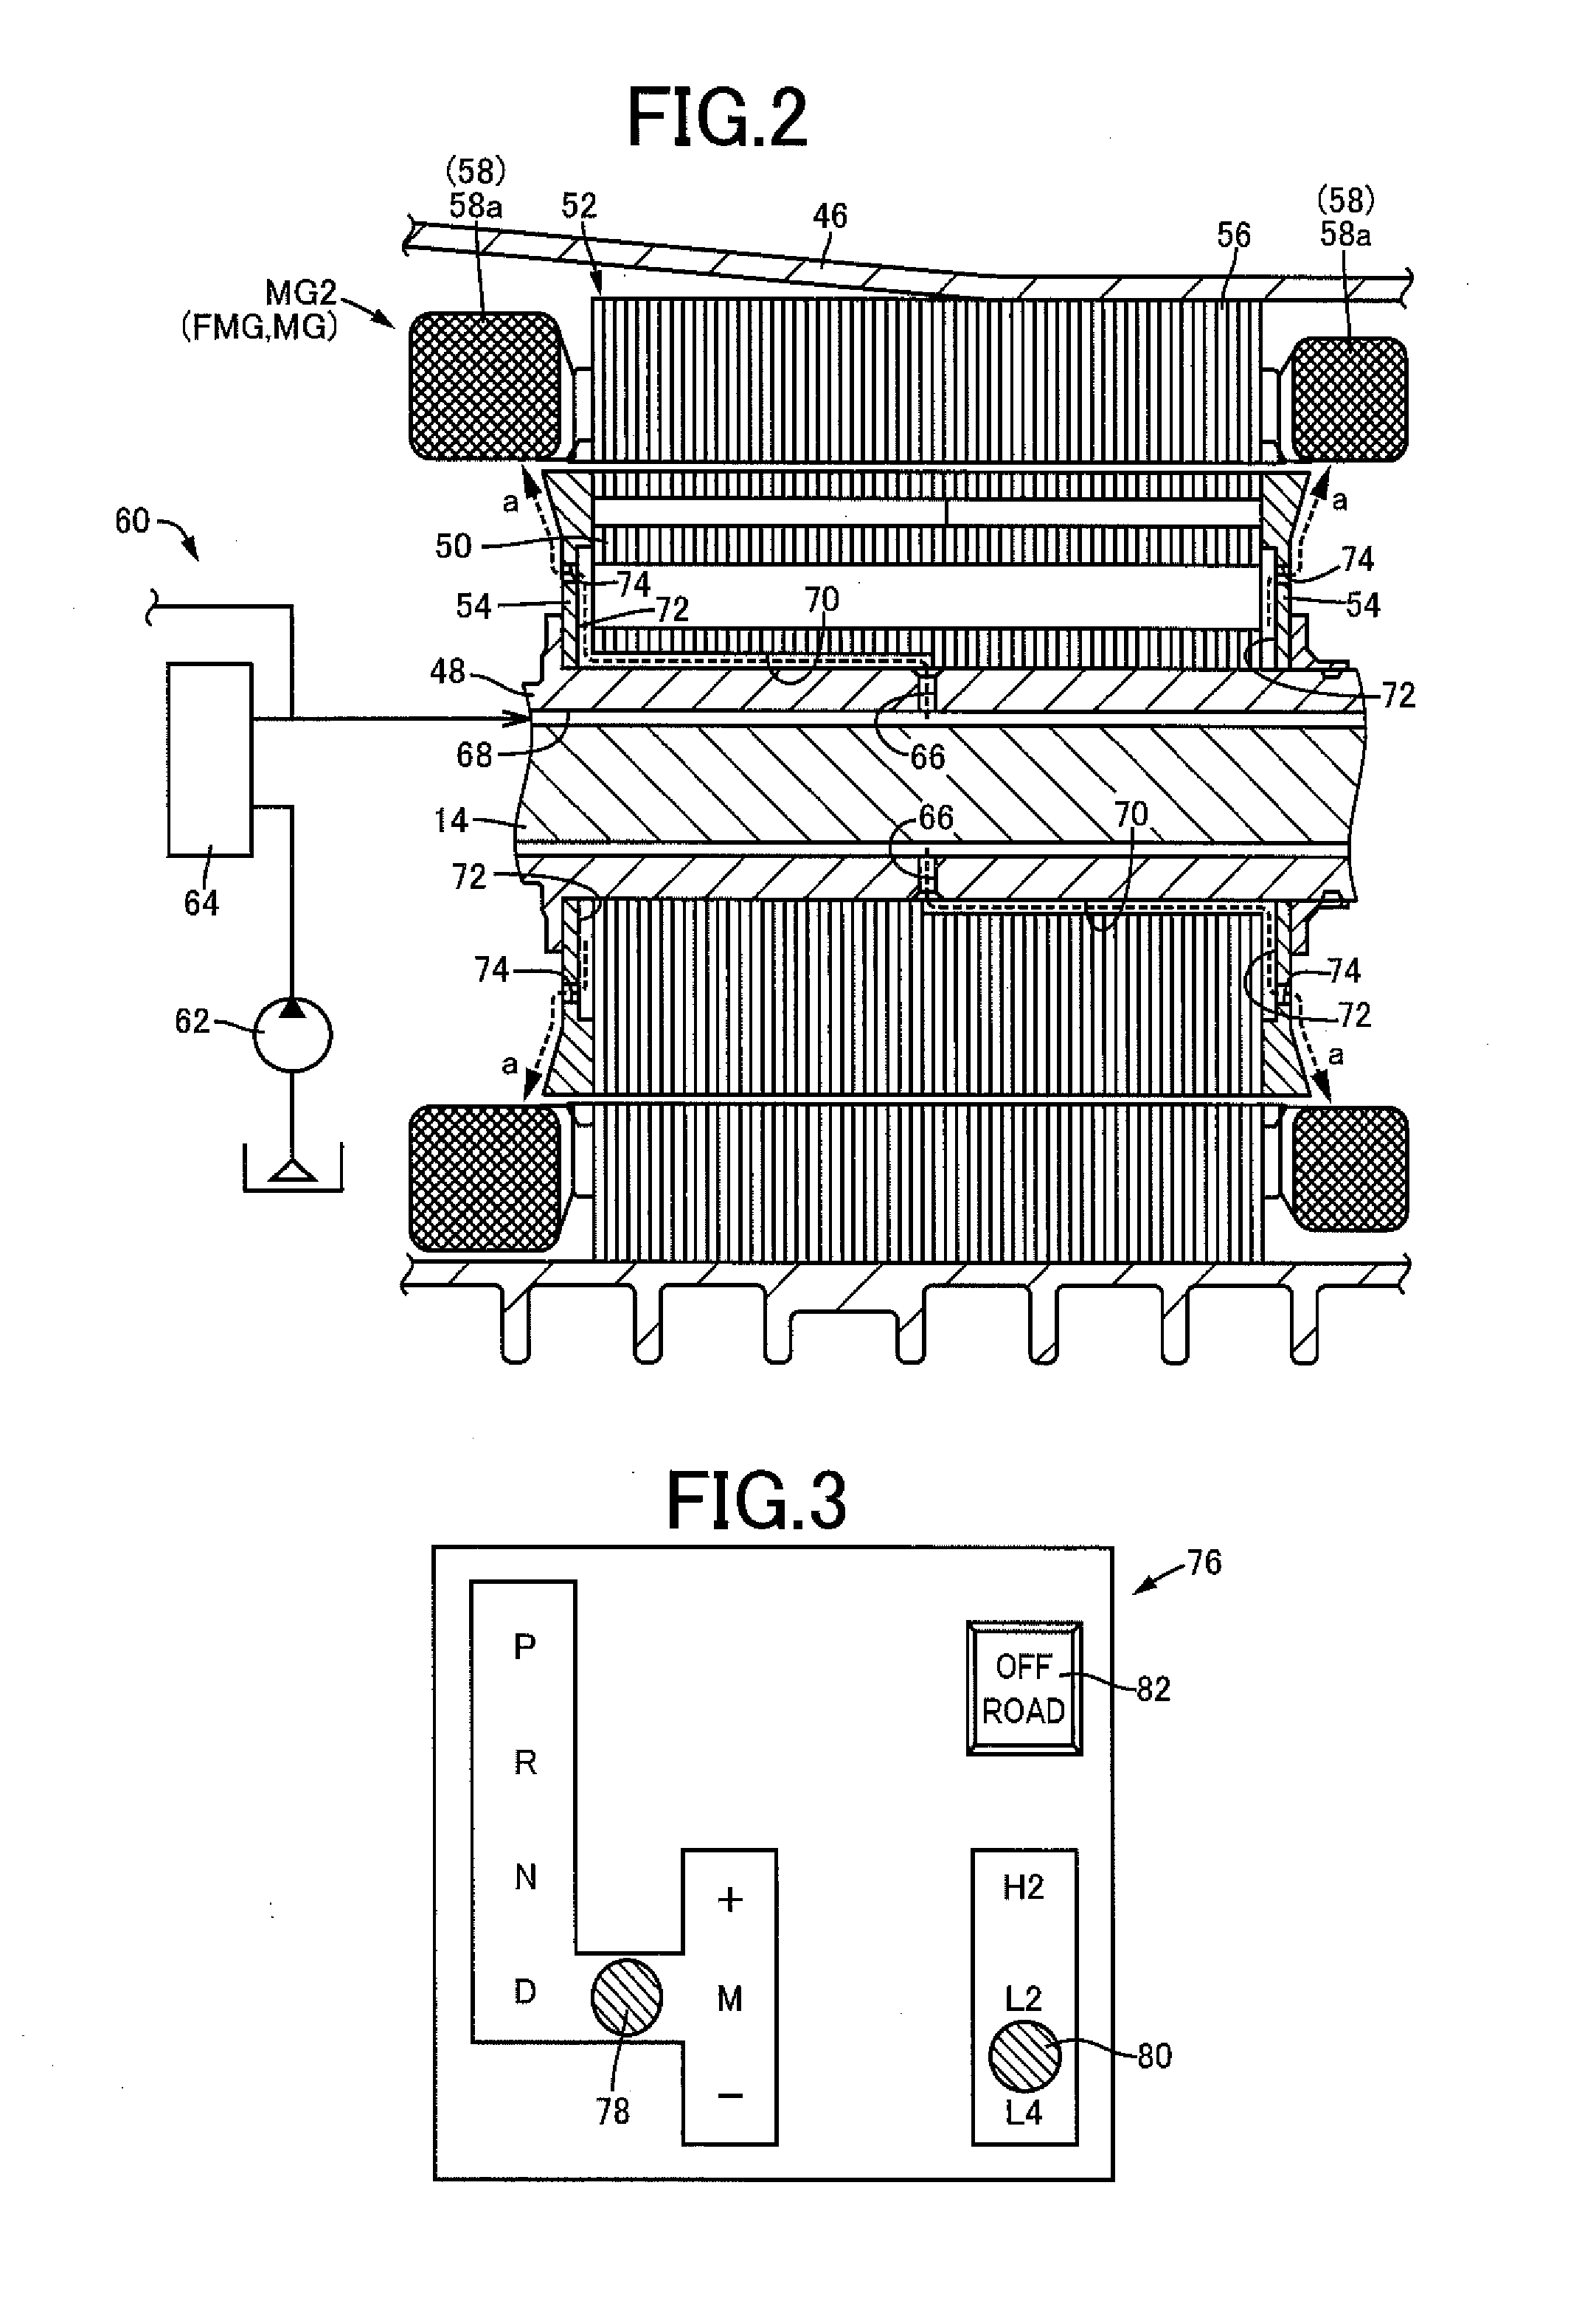 Control device for a vehicle